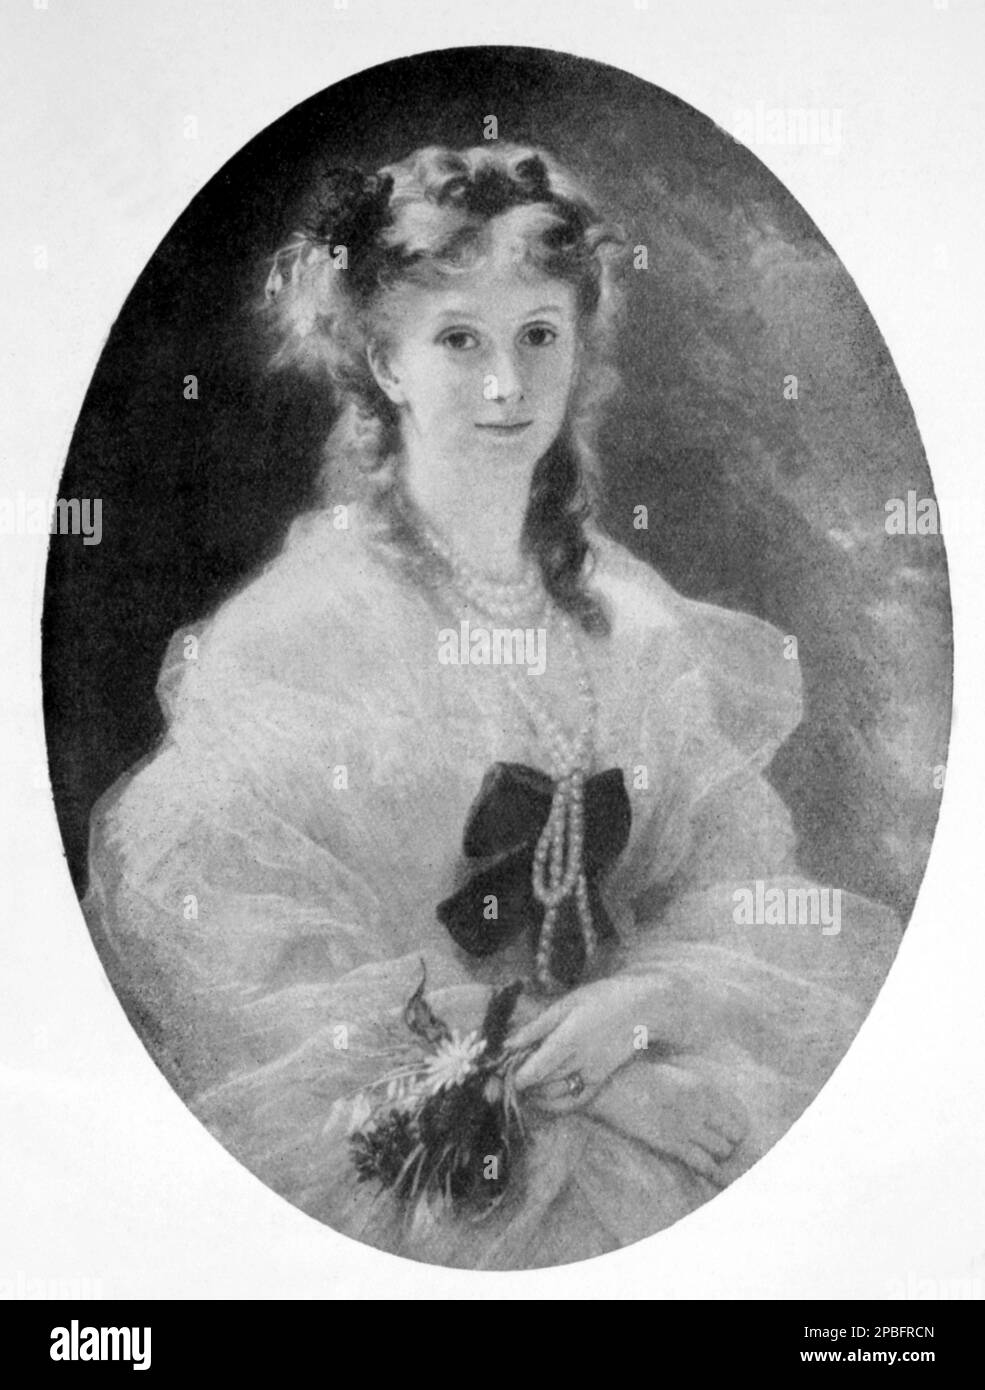 1857 ca :  The french Duchesse DE MORNY , born princesse Sophie Troubetzkoï ( 1838 -1896 ), natural daughter of the Tzar of Russia Nicholas I . Was the Queen of Paris life during the Second Empire by Napoleon III Bonaparte . Married with  Duke  Charles Auguste Louis Joseph Demorny ( 1811 - 1865 ) , politician and half-brother of Emperor Napoleon III .  Portrait by painter Franz Xaver Winterhalter ( 1805- 1873 ) - FRANCIA - NOBILITY - NOBILI -  Nobiltà  -  FOTO STORICHE - HISTORY PHOTOS  - pearls necklace - collana di perle - perla   ----  Archivio GBB Stock Photo